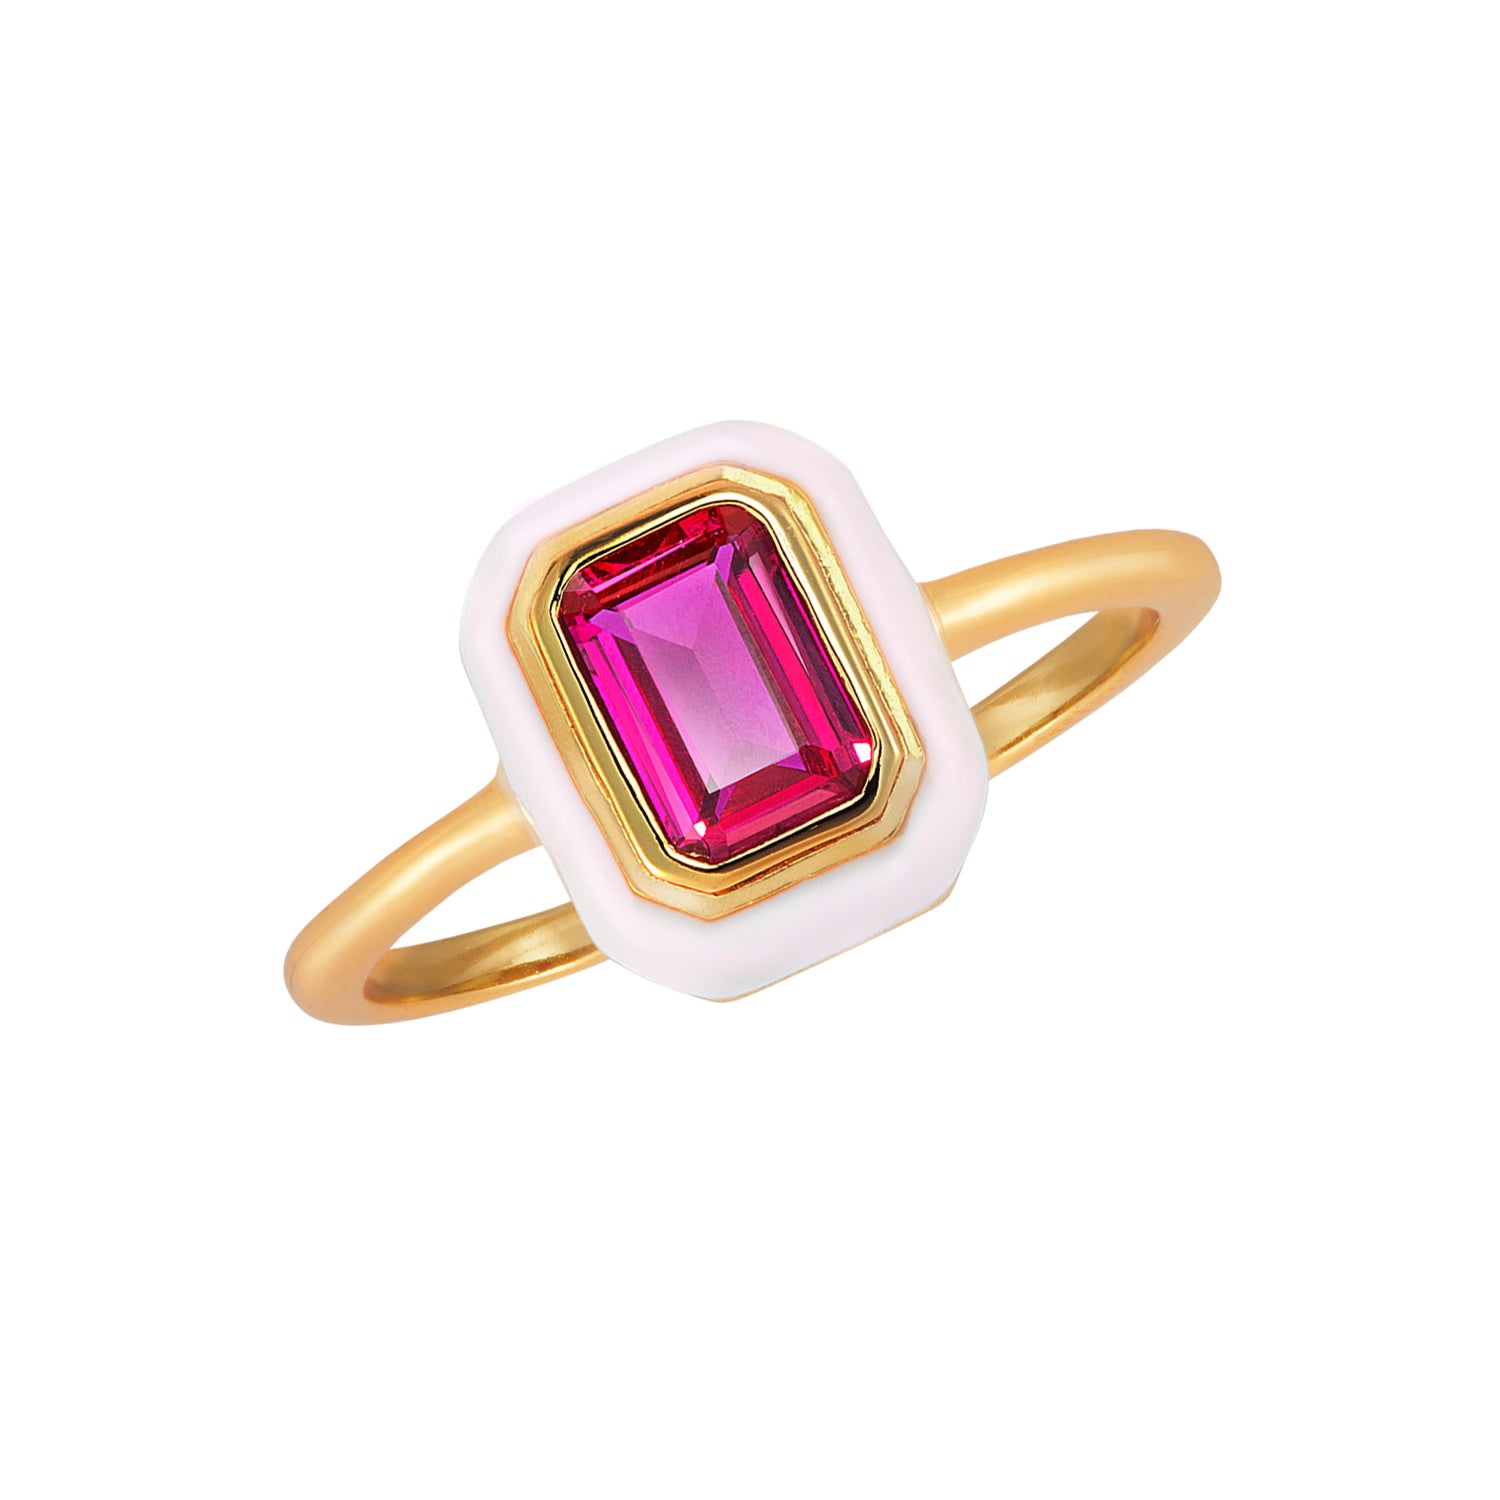 J&CO Jewellery Ruby Bedazzle Gold Ring US 8 US 8